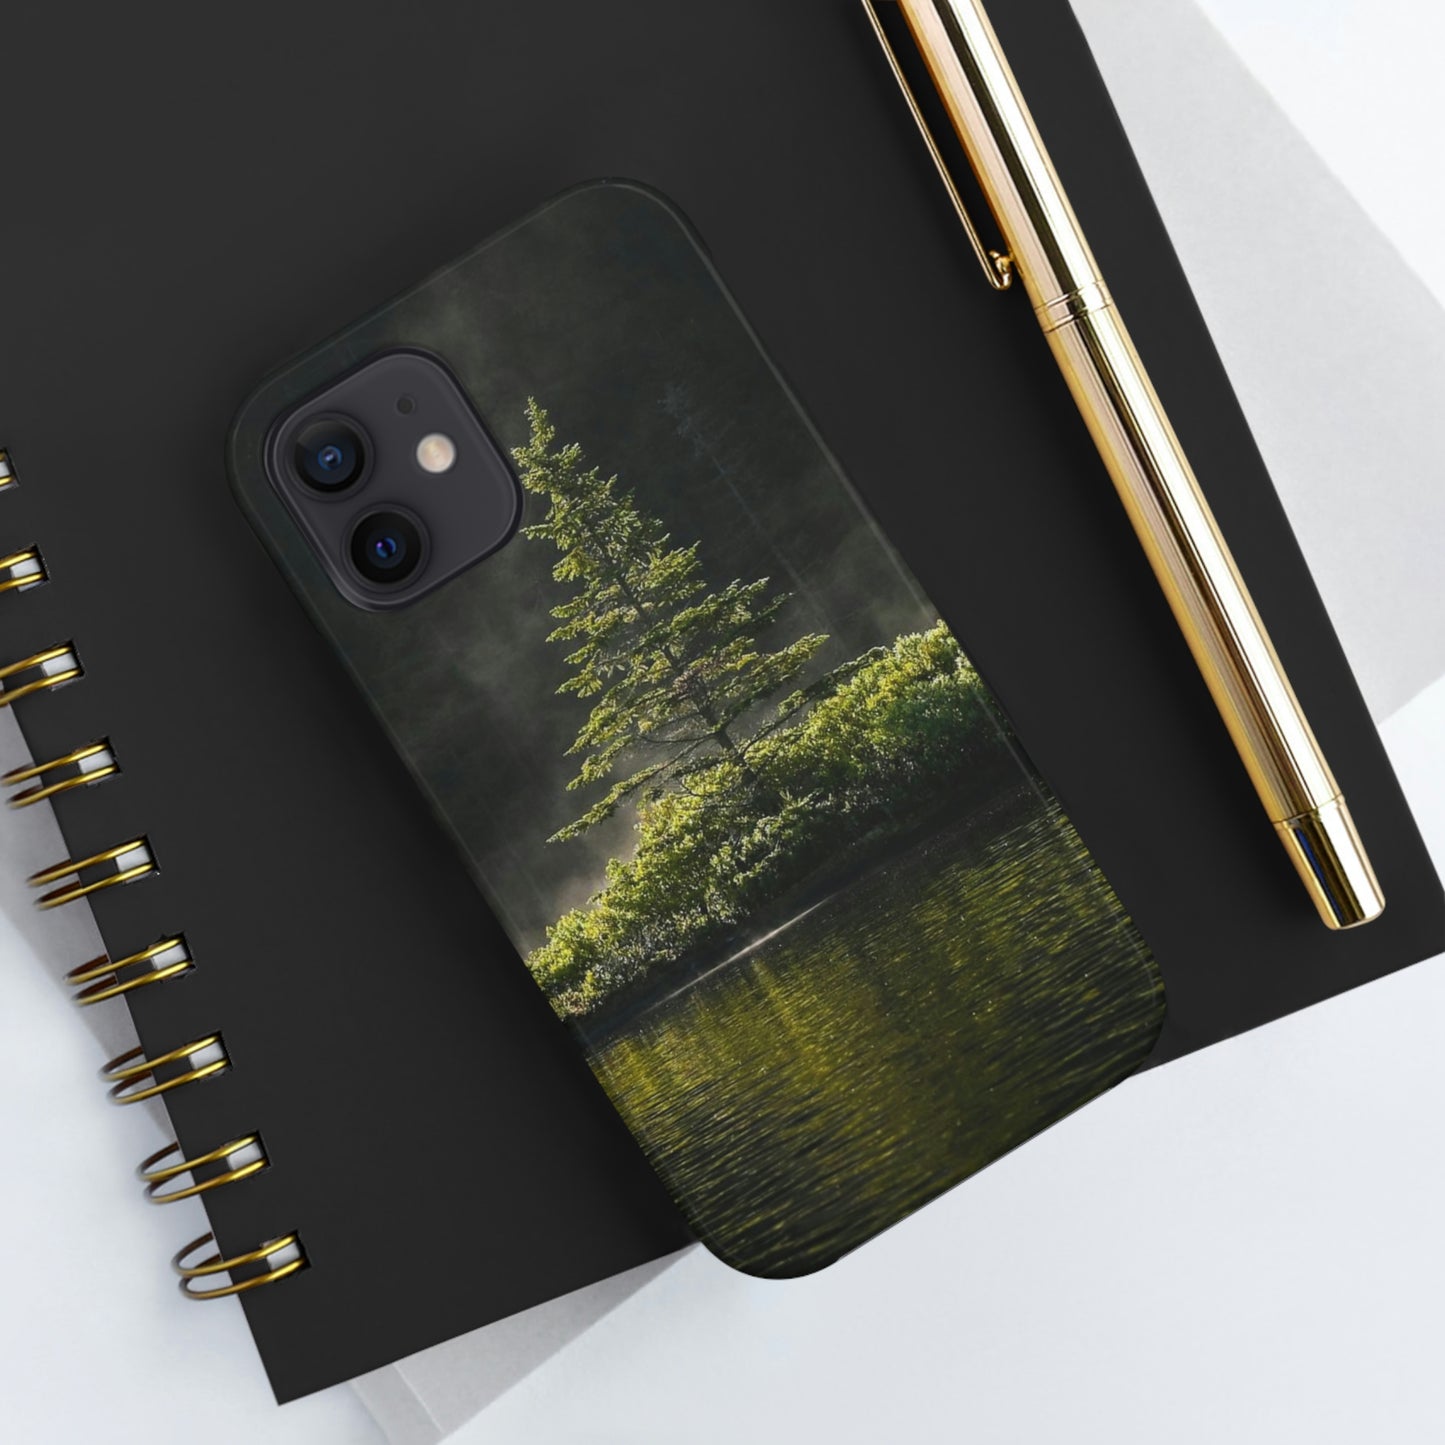 Impact Resistant Phone Case - Misty Morning